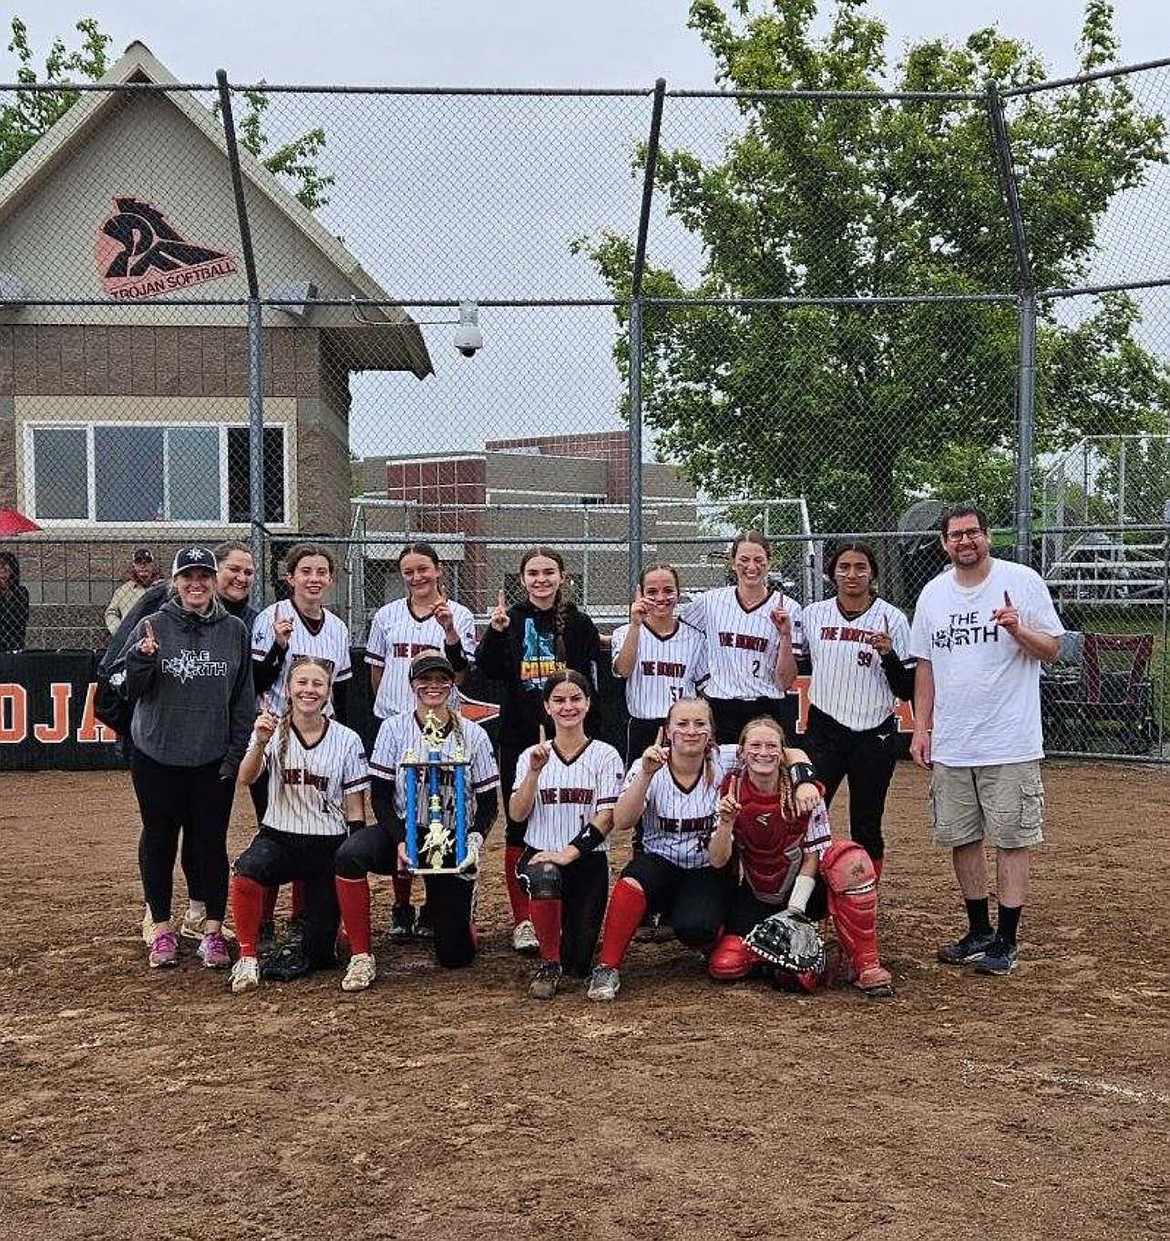 The North 14U travel softball team shows off their hardware after winning the silver bracket of the CDA Crush Invitational. Back row, from left are assistant coach Lacy Inge, coach Leah Platt, Heather Stumm, Bailey Pierson, Jennifer Petersen, Hannah Frago, Bailey Wilson, Zxyloh Johnson and head coach John Wilson. Front row, from left are Raelyn Olsen, Teagan Newsom, Taylor Bannick, Ariana Turnbull and Avery Inge.